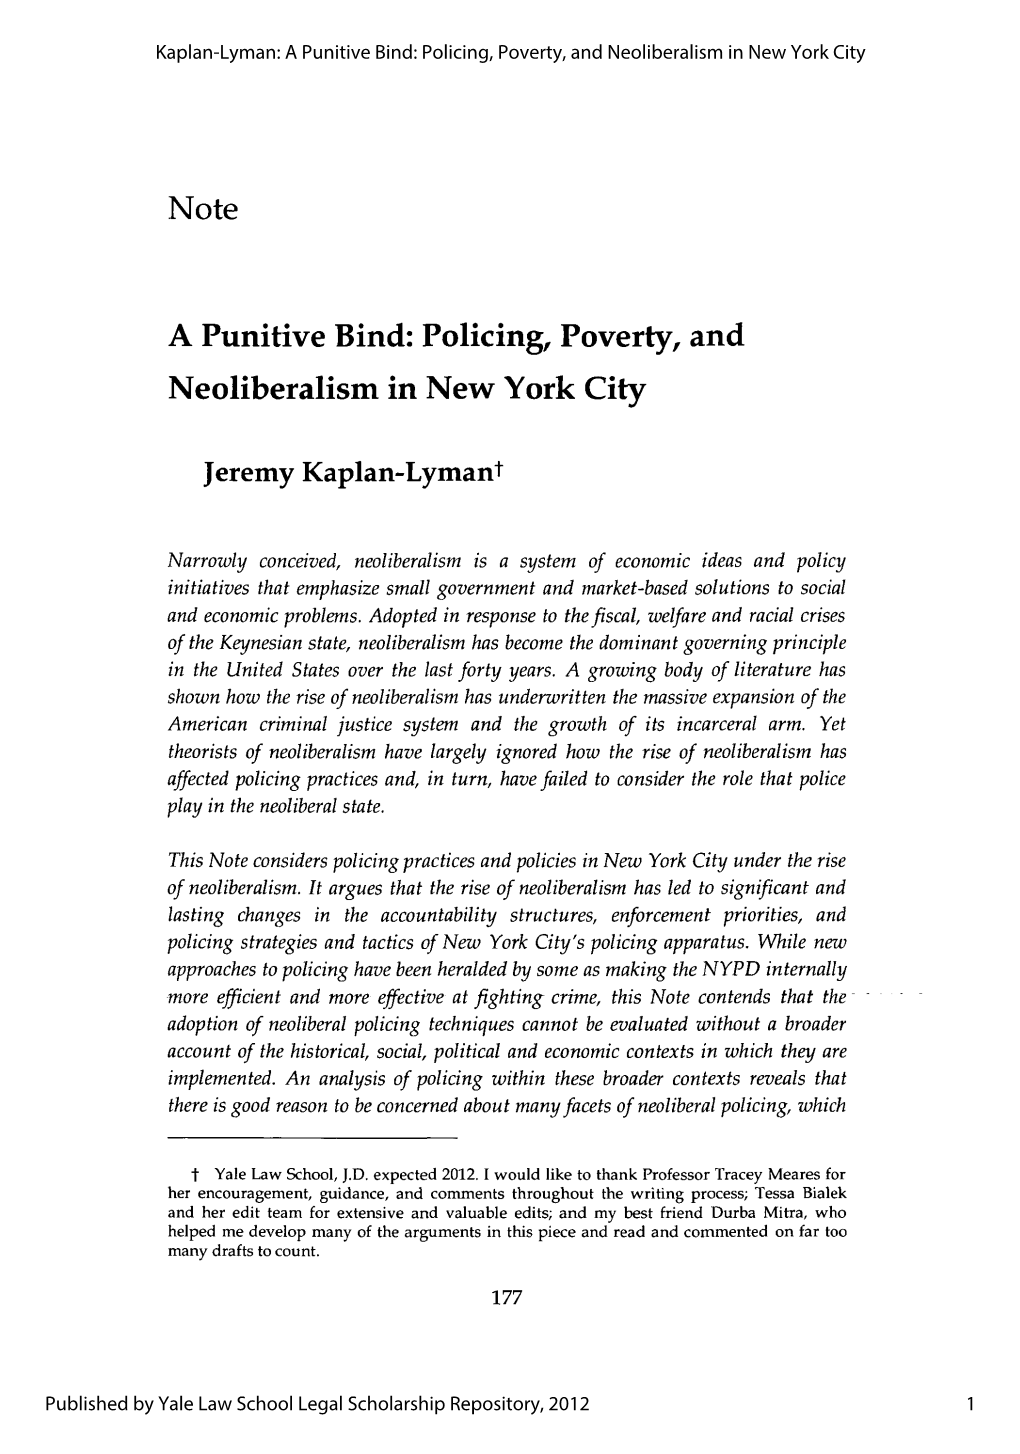 A Punitive Bind: Policing, Poverty, and Neoliberalism in New York City